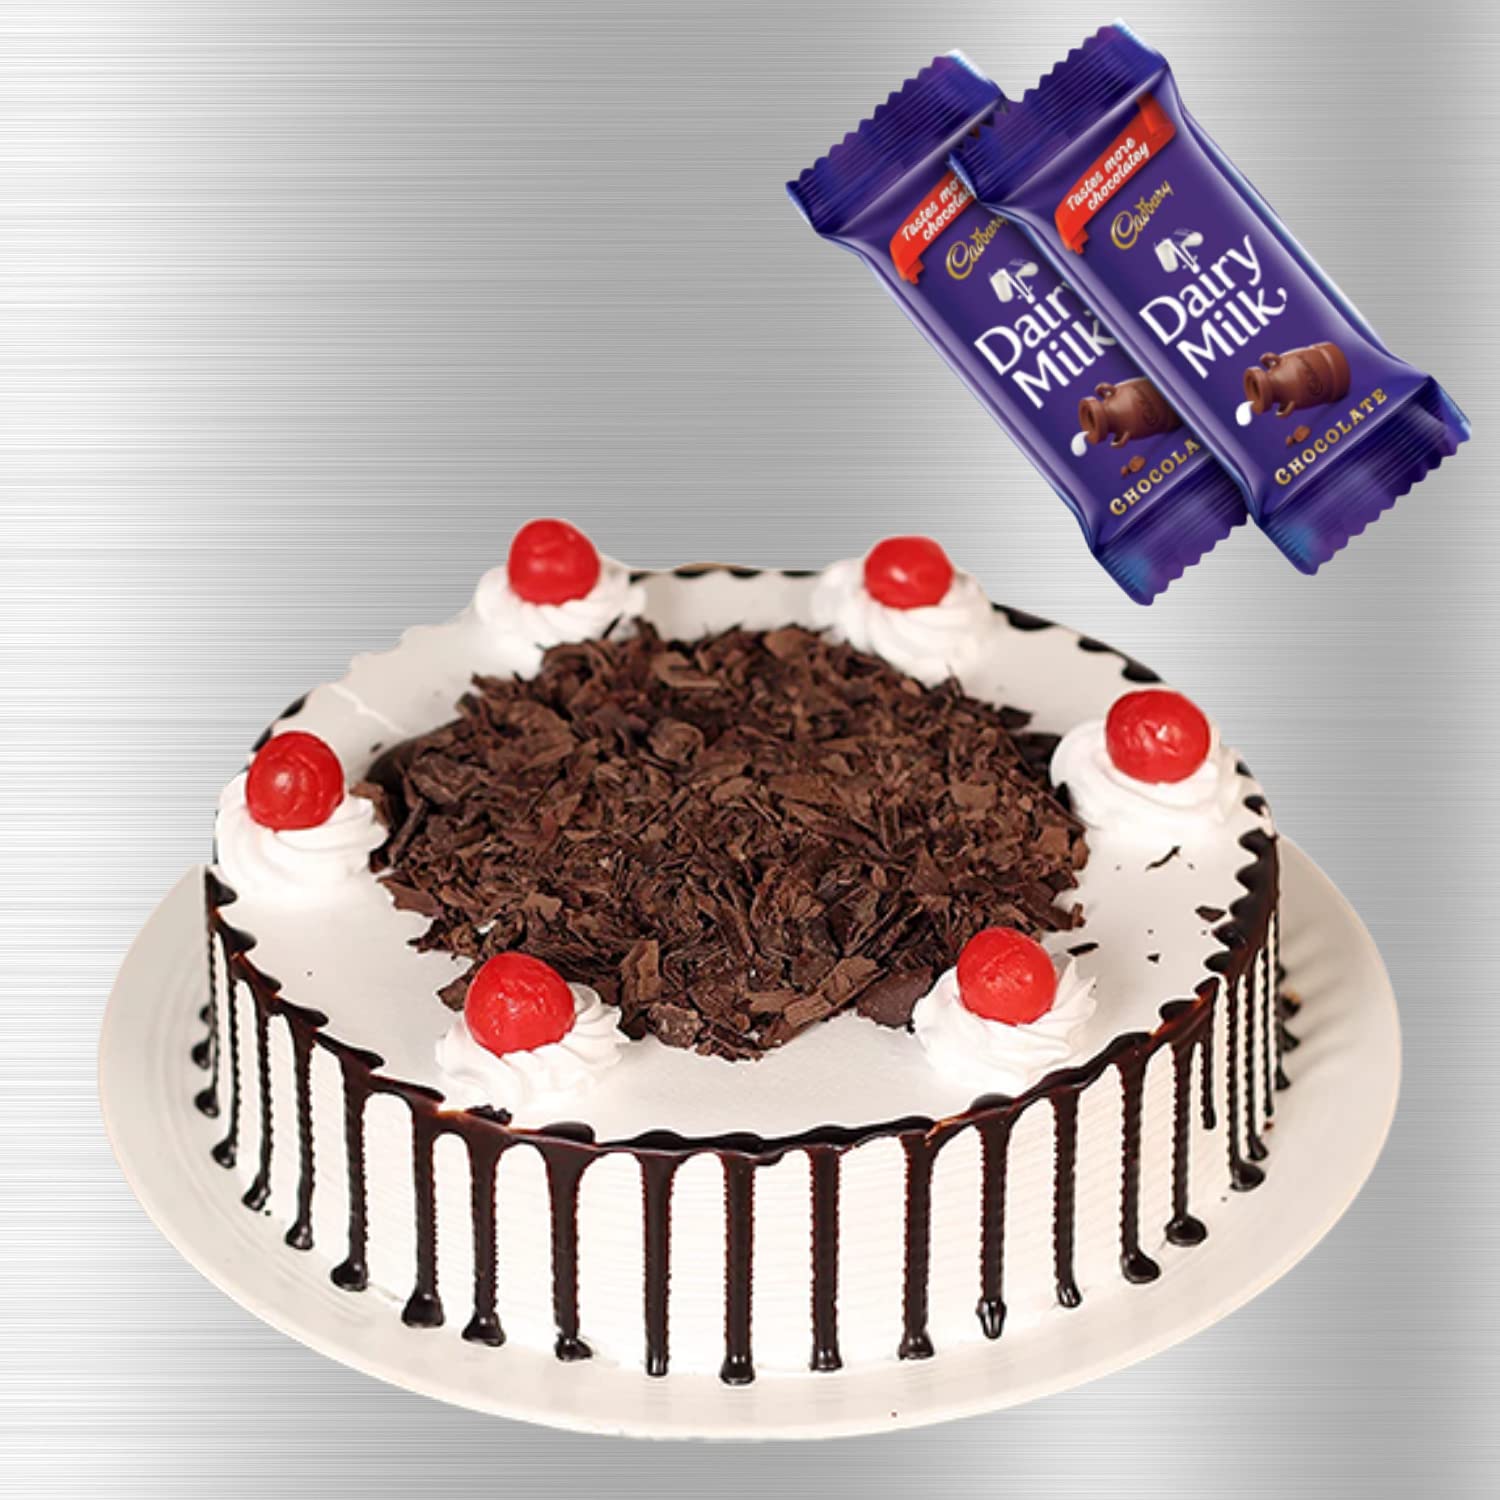 Black forest Cake and chocolate combo